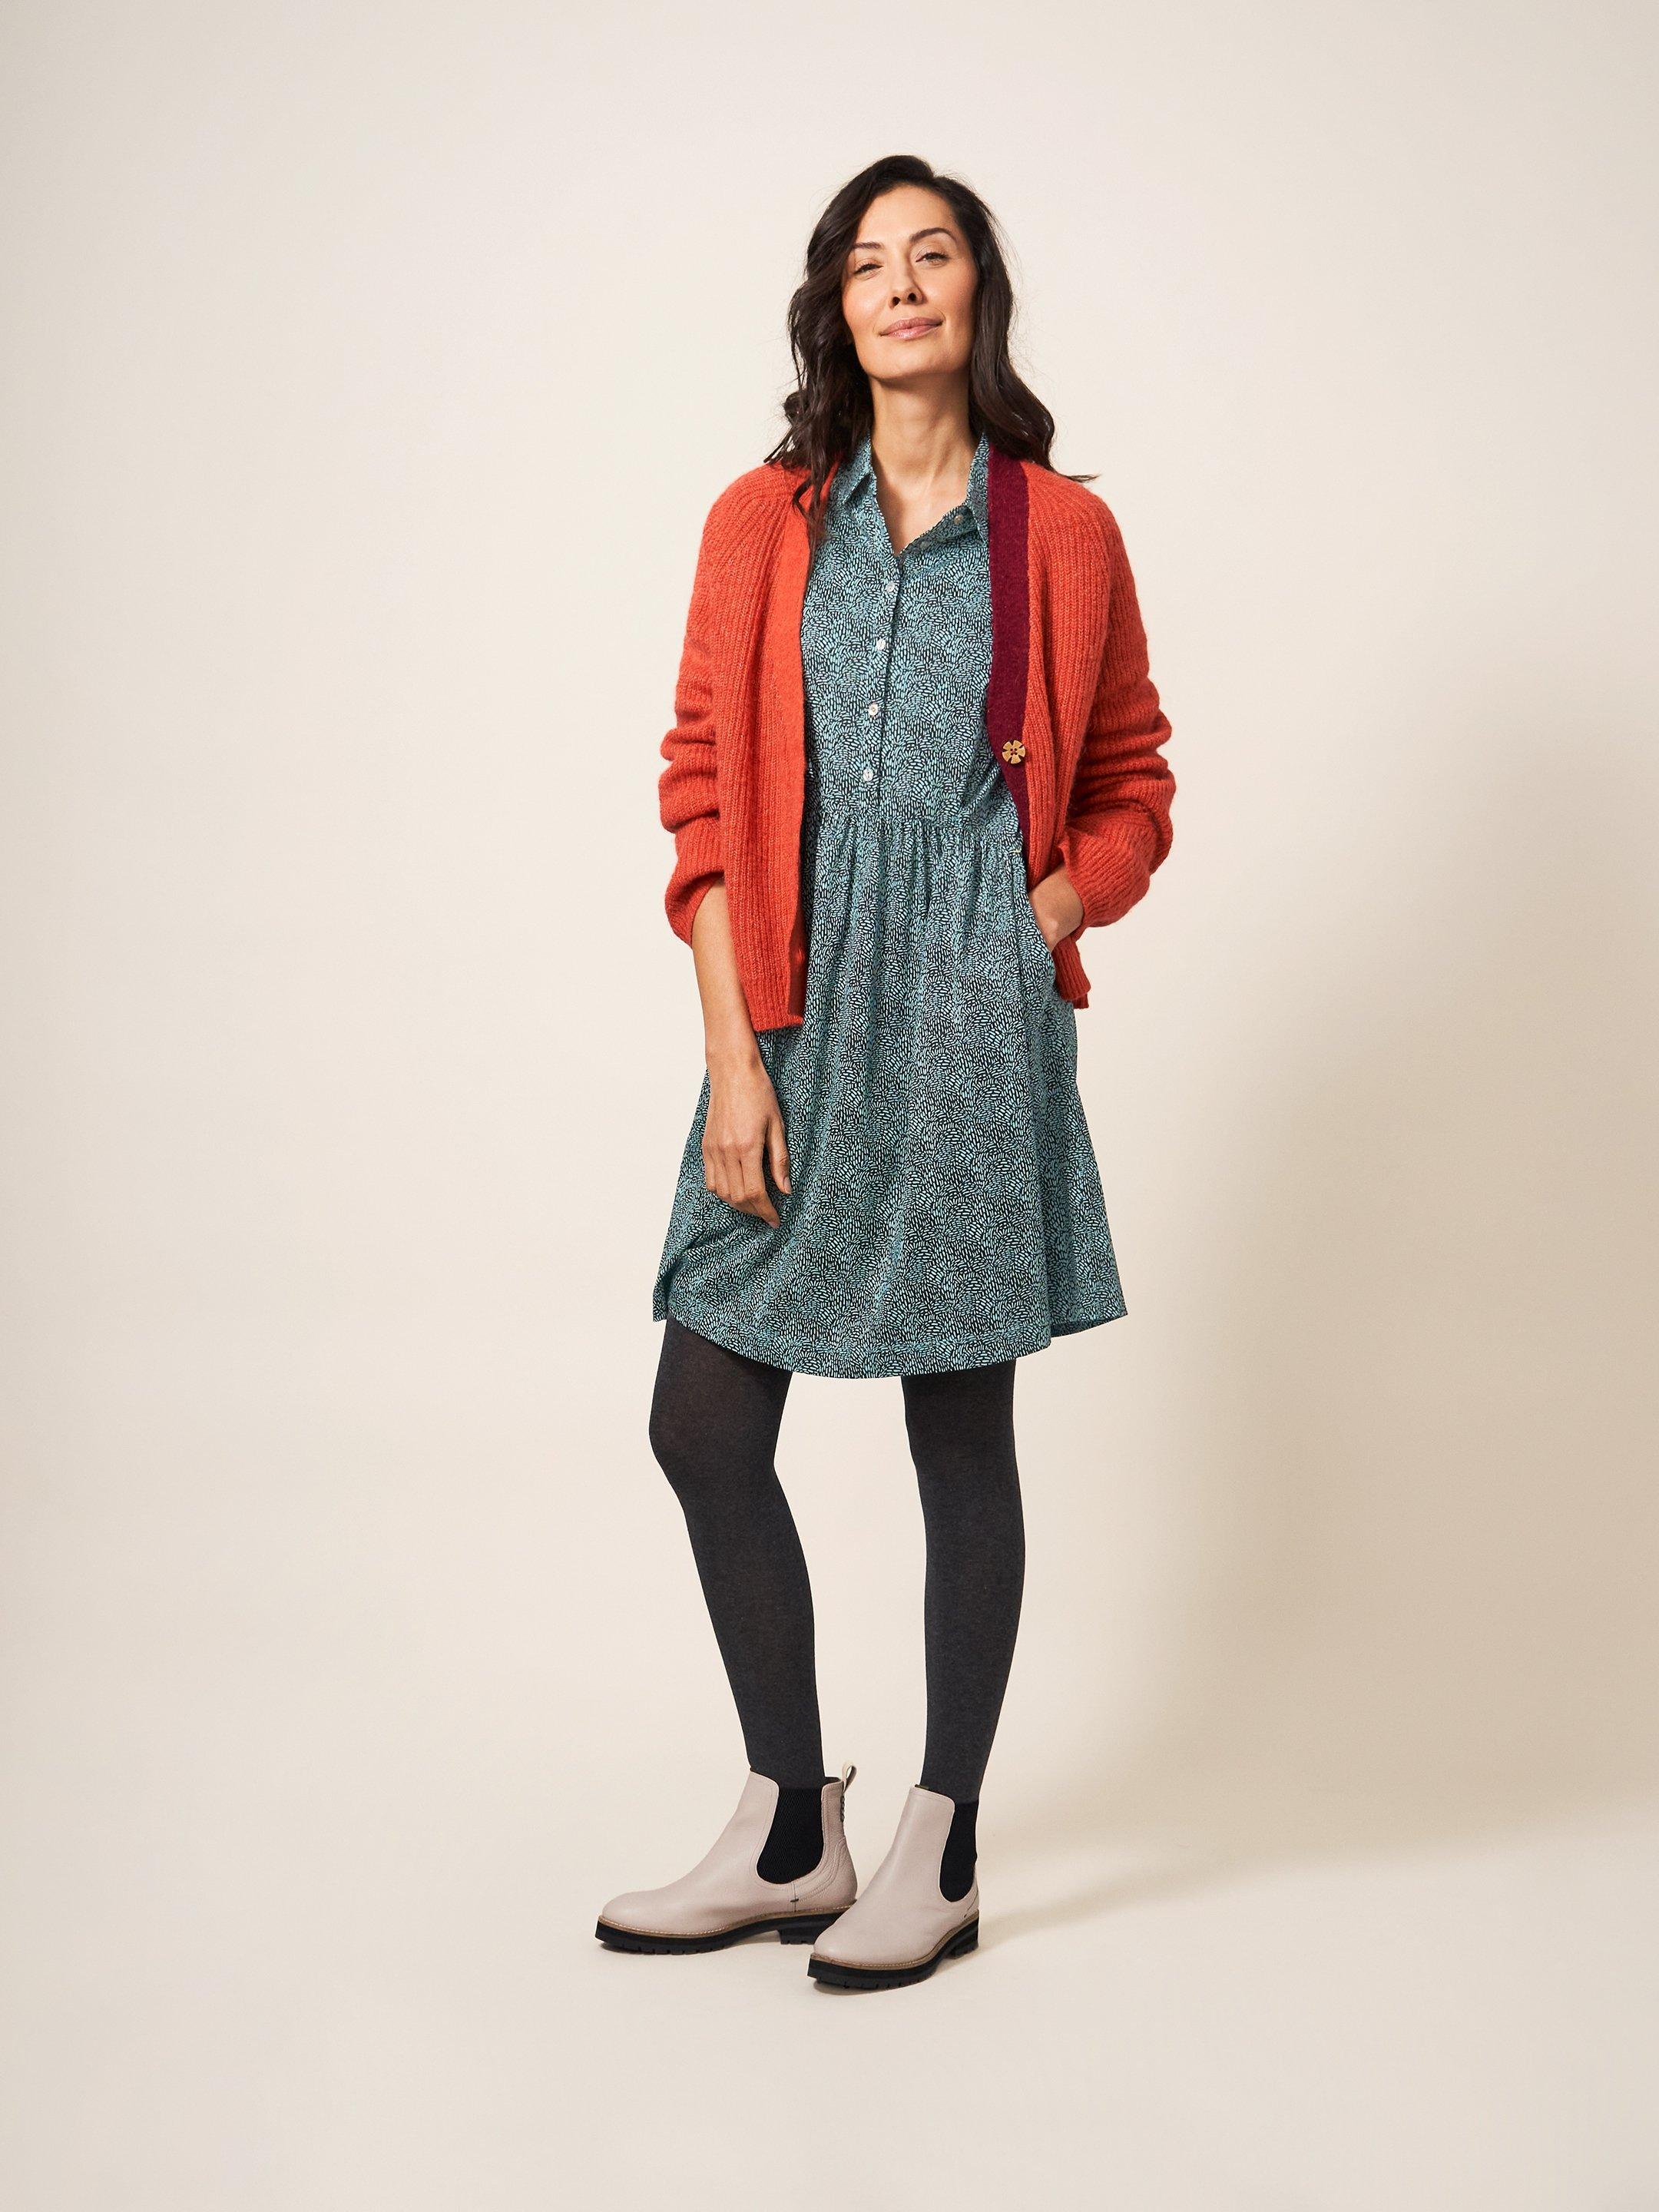 Everly Jersey Dress in TEAL MLT - MODEL FRONT